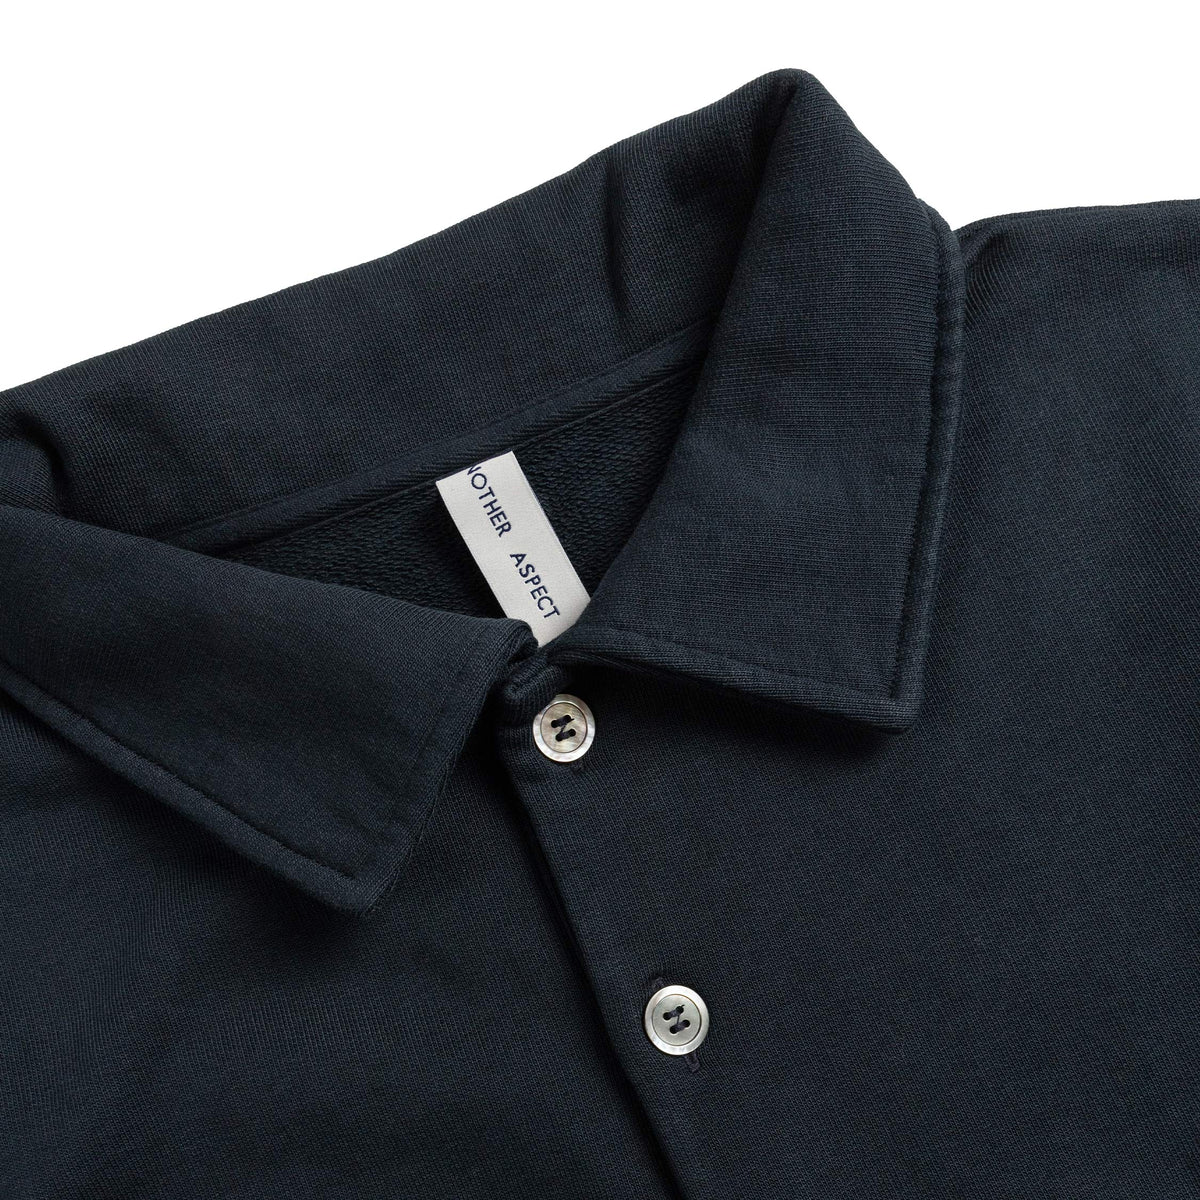 Another Aspect Polo Shirt 1.0 – buy now online at ASPHALTGOLD!